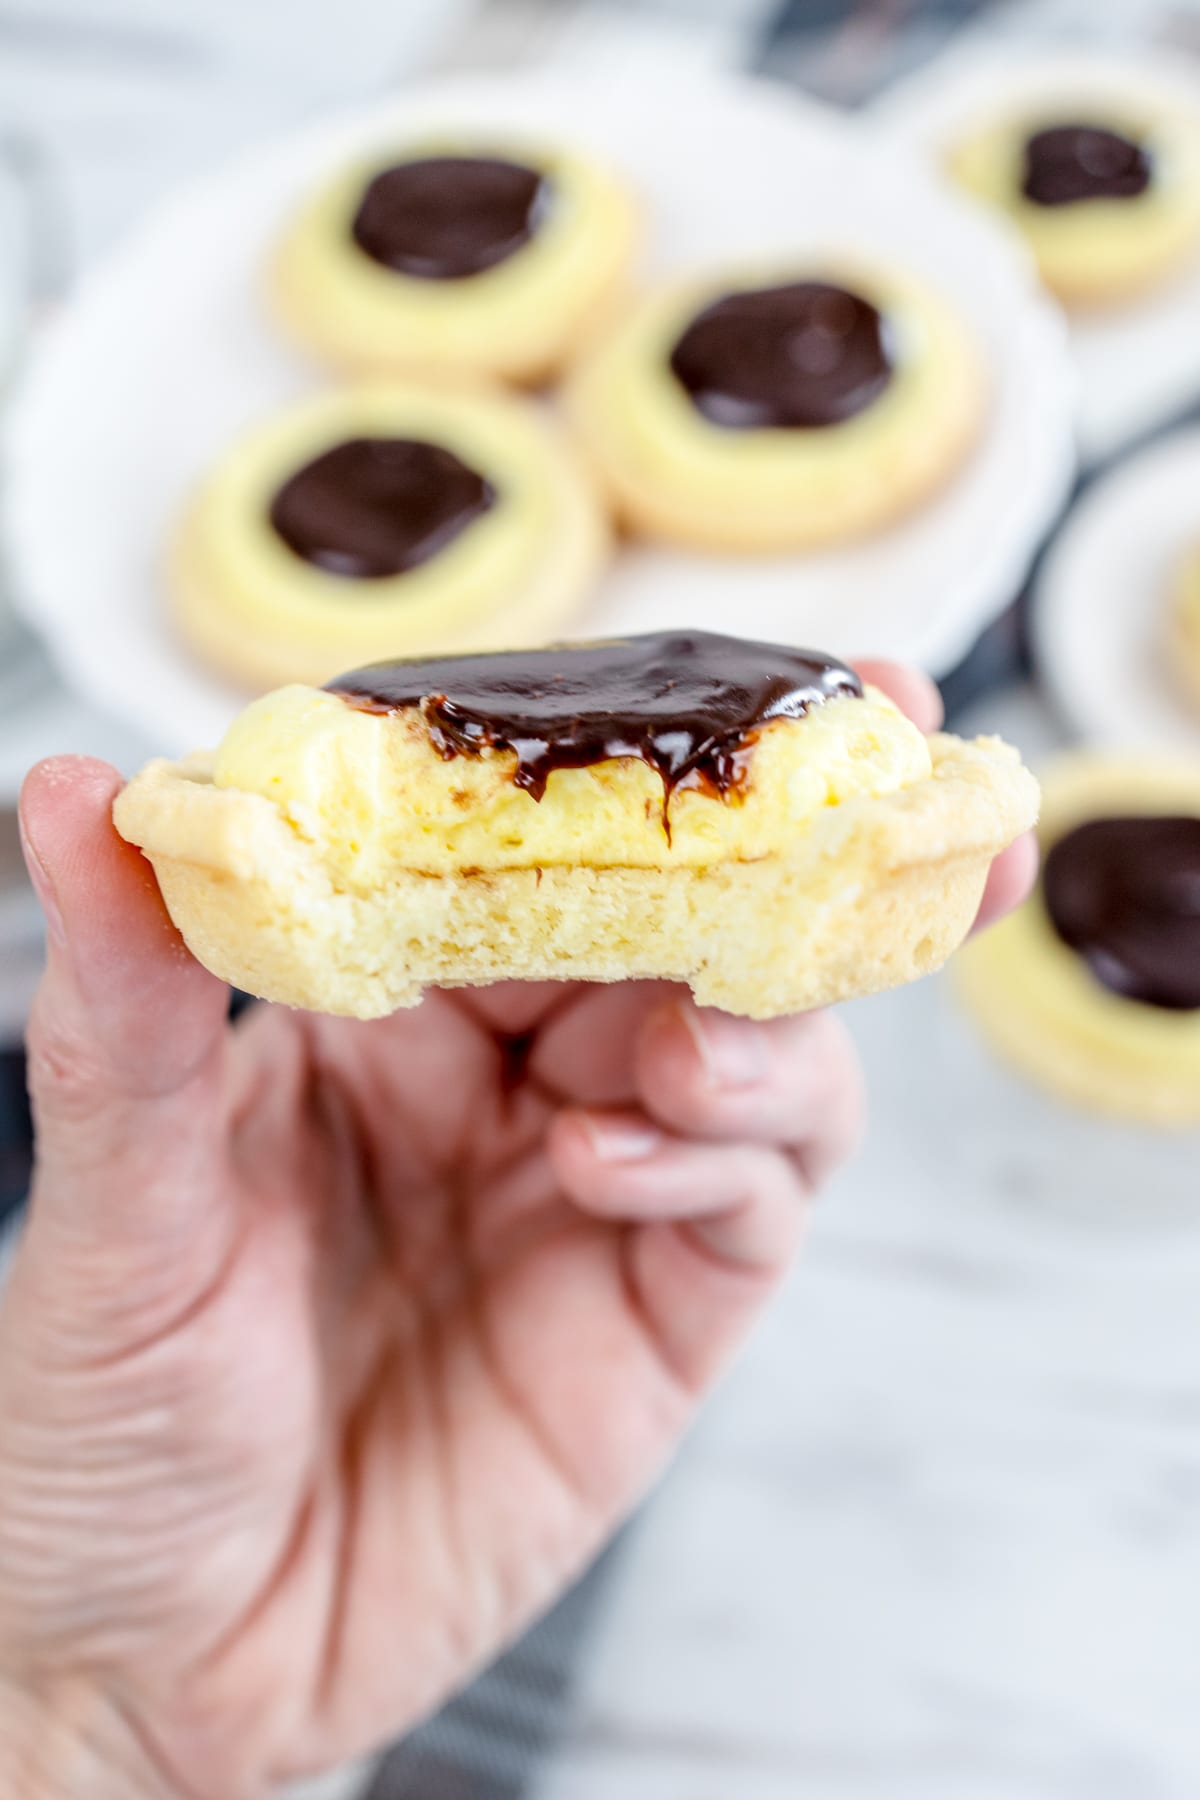 Boston cream pie cookie with a bite taken out of it being held in mid air by a hand.